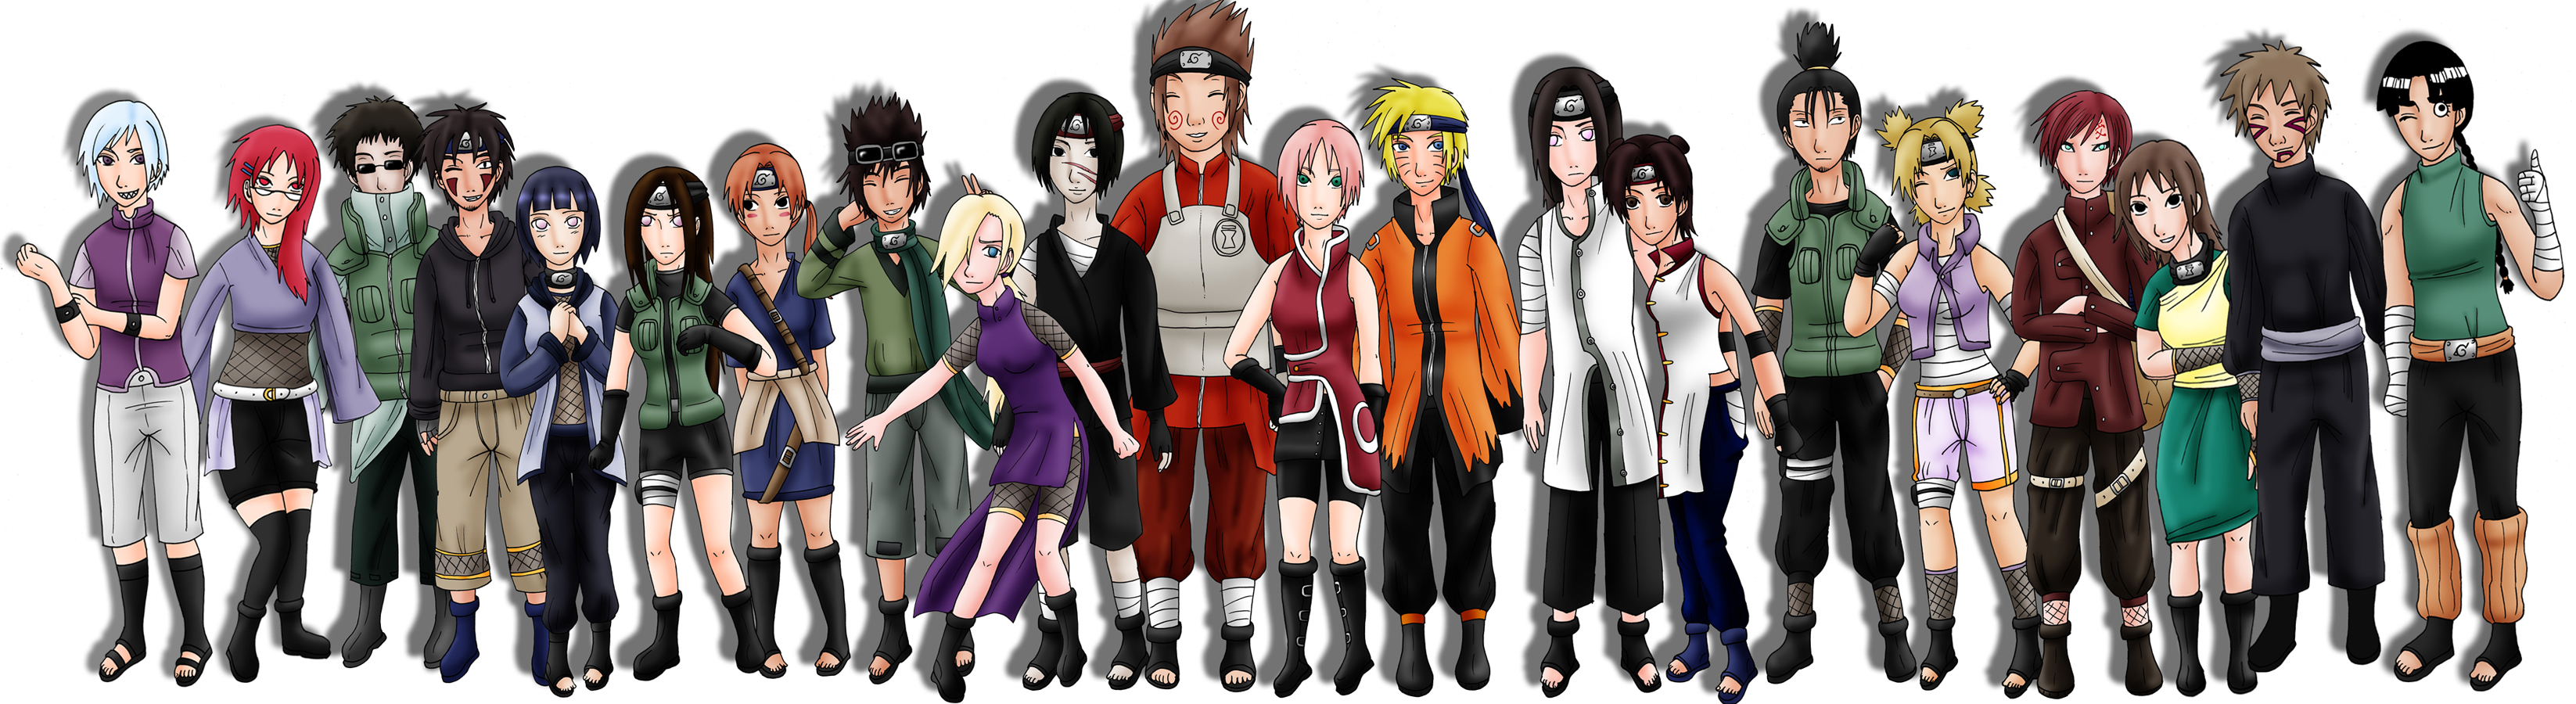 The Future Of Naruto By Kaschra On Deviantart.